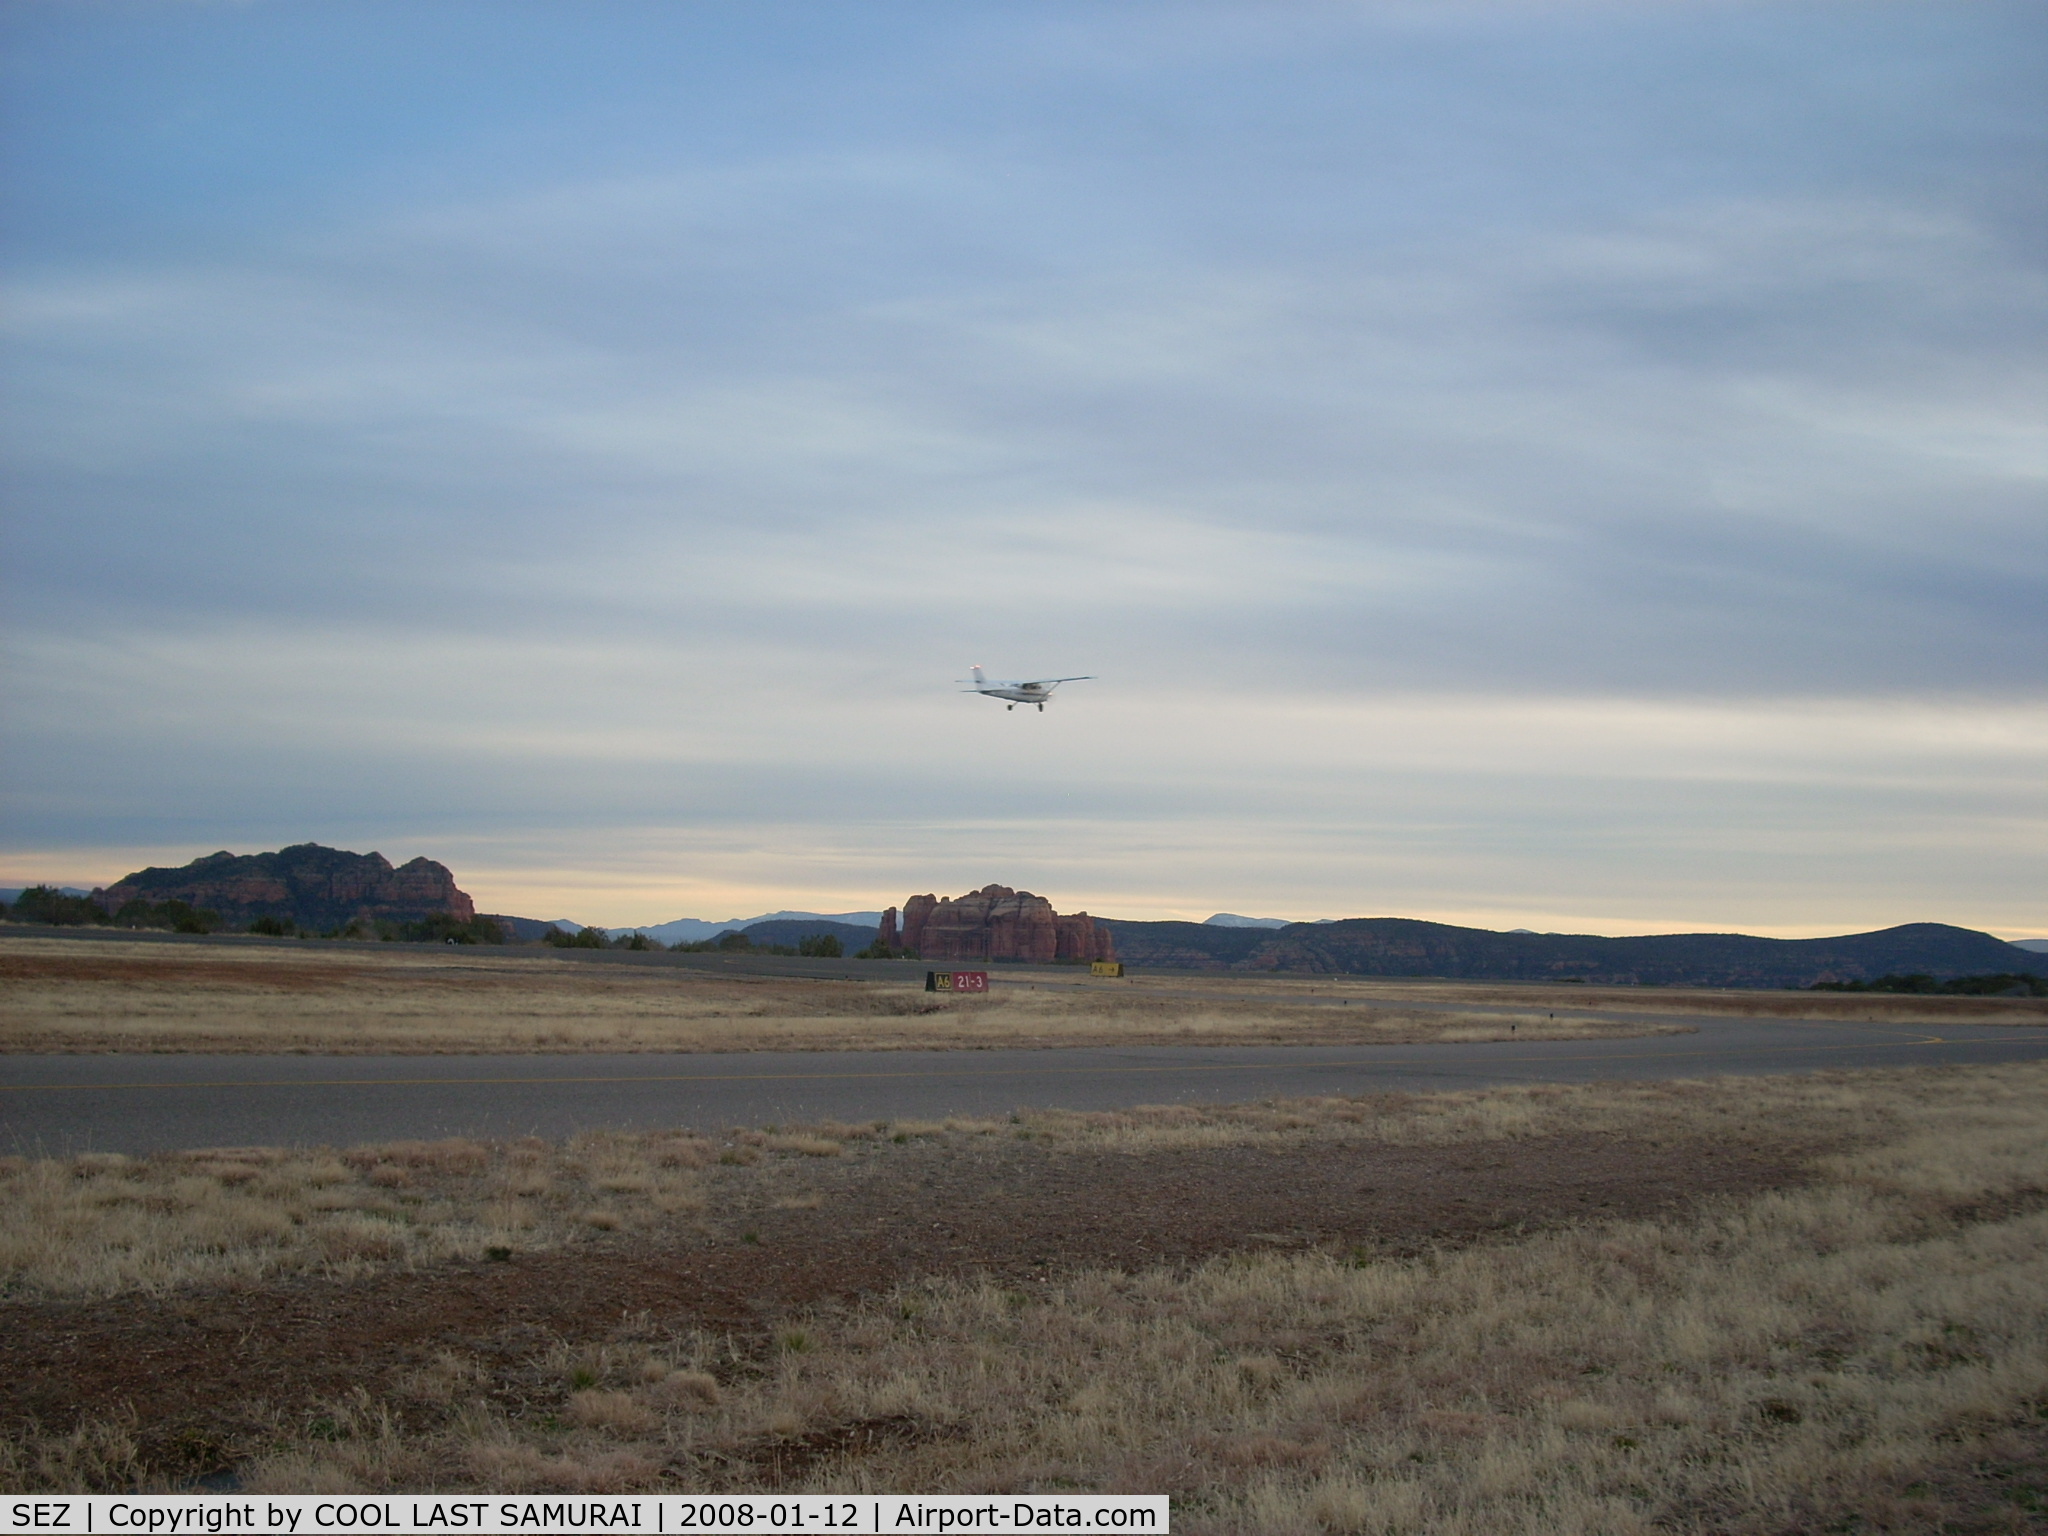 Sedona Airport (SEZ) - C172 taking off from SEZ Rwy21